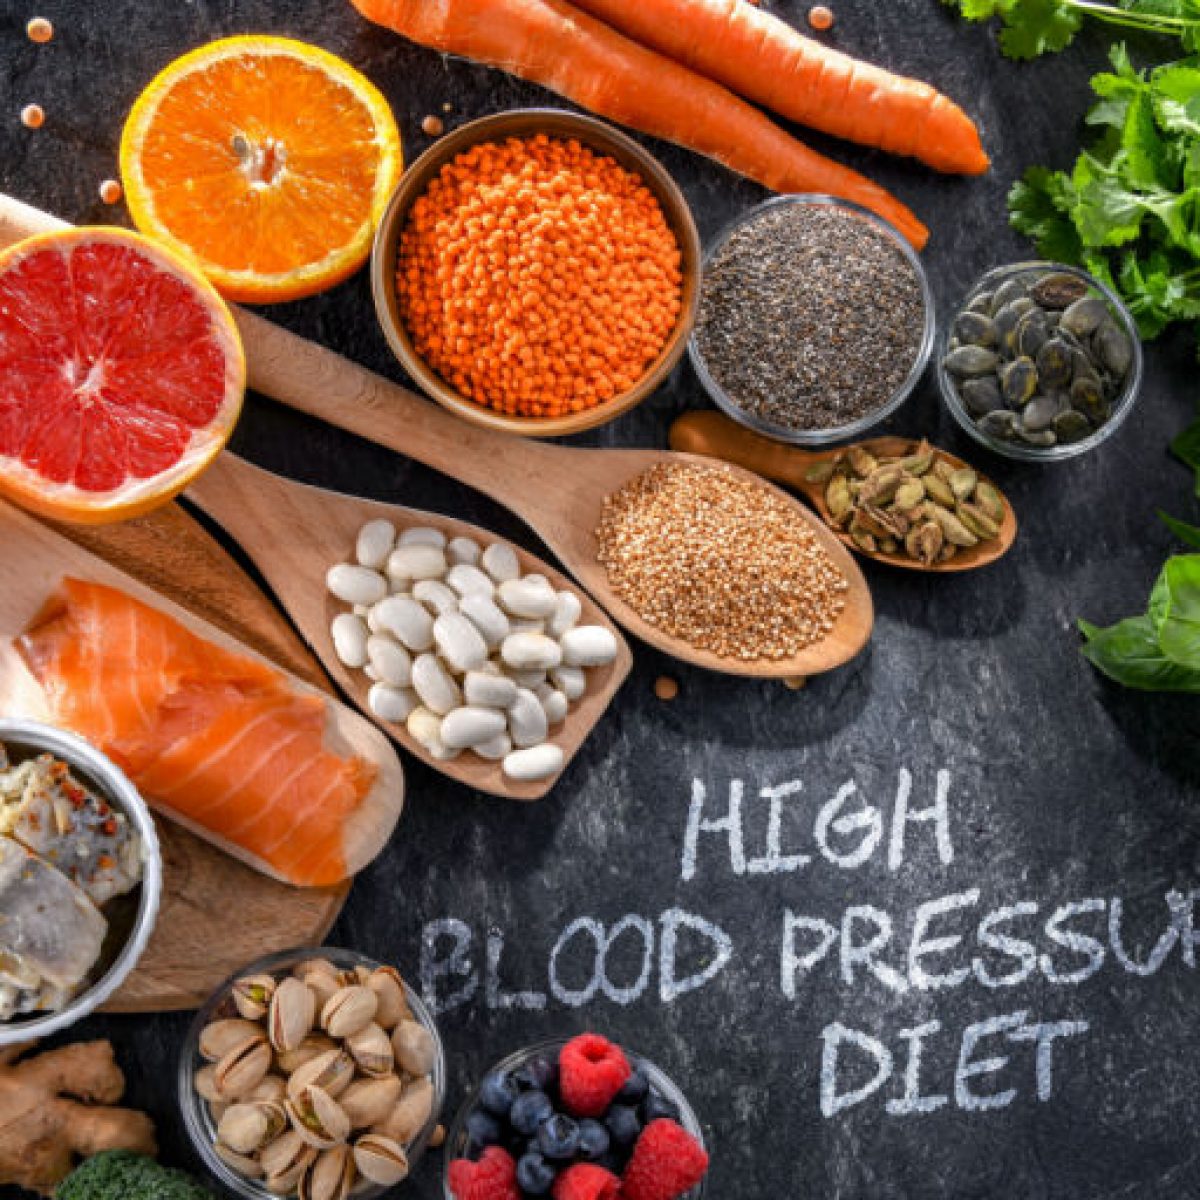 Home remedies for high blood pressure